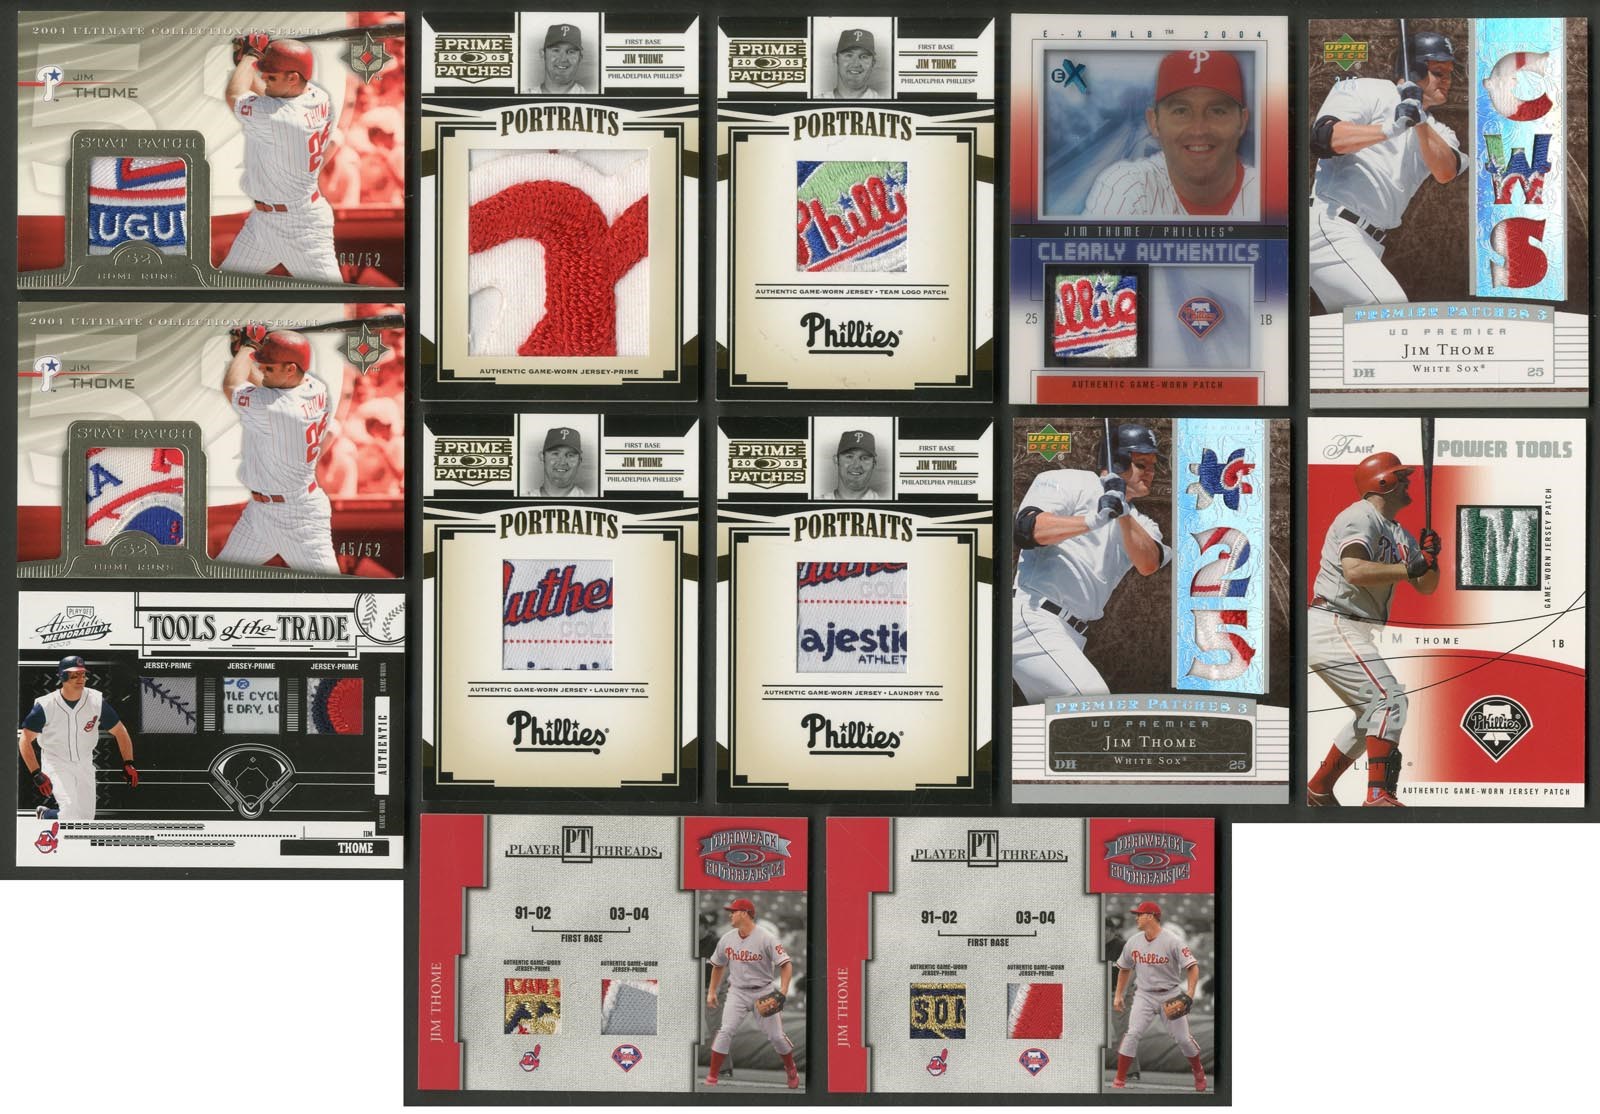 Jim Thome Master Collection - Huge Jim Thome Modern Insert Game Worn Multi-Color Patch Collection (540+)